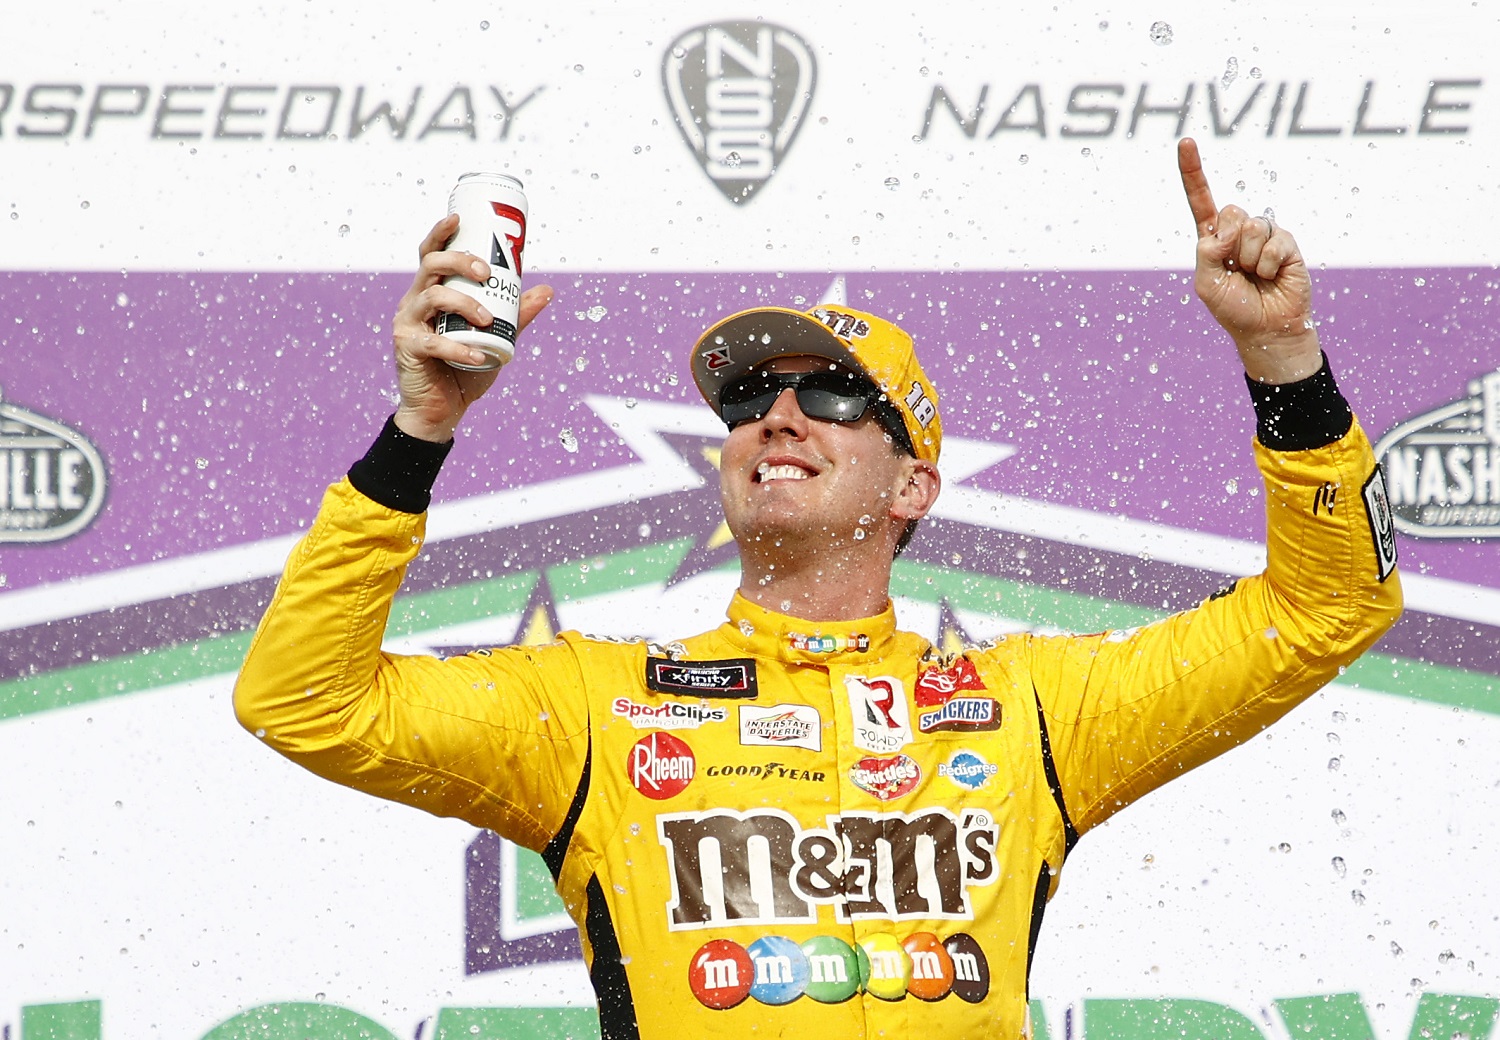 Kyle Busch celebrates in victory lane after winning the NASCAR Xfinity Series Tennessee Lottery 250 at Nashville Superspeedway on June 19, 2021.